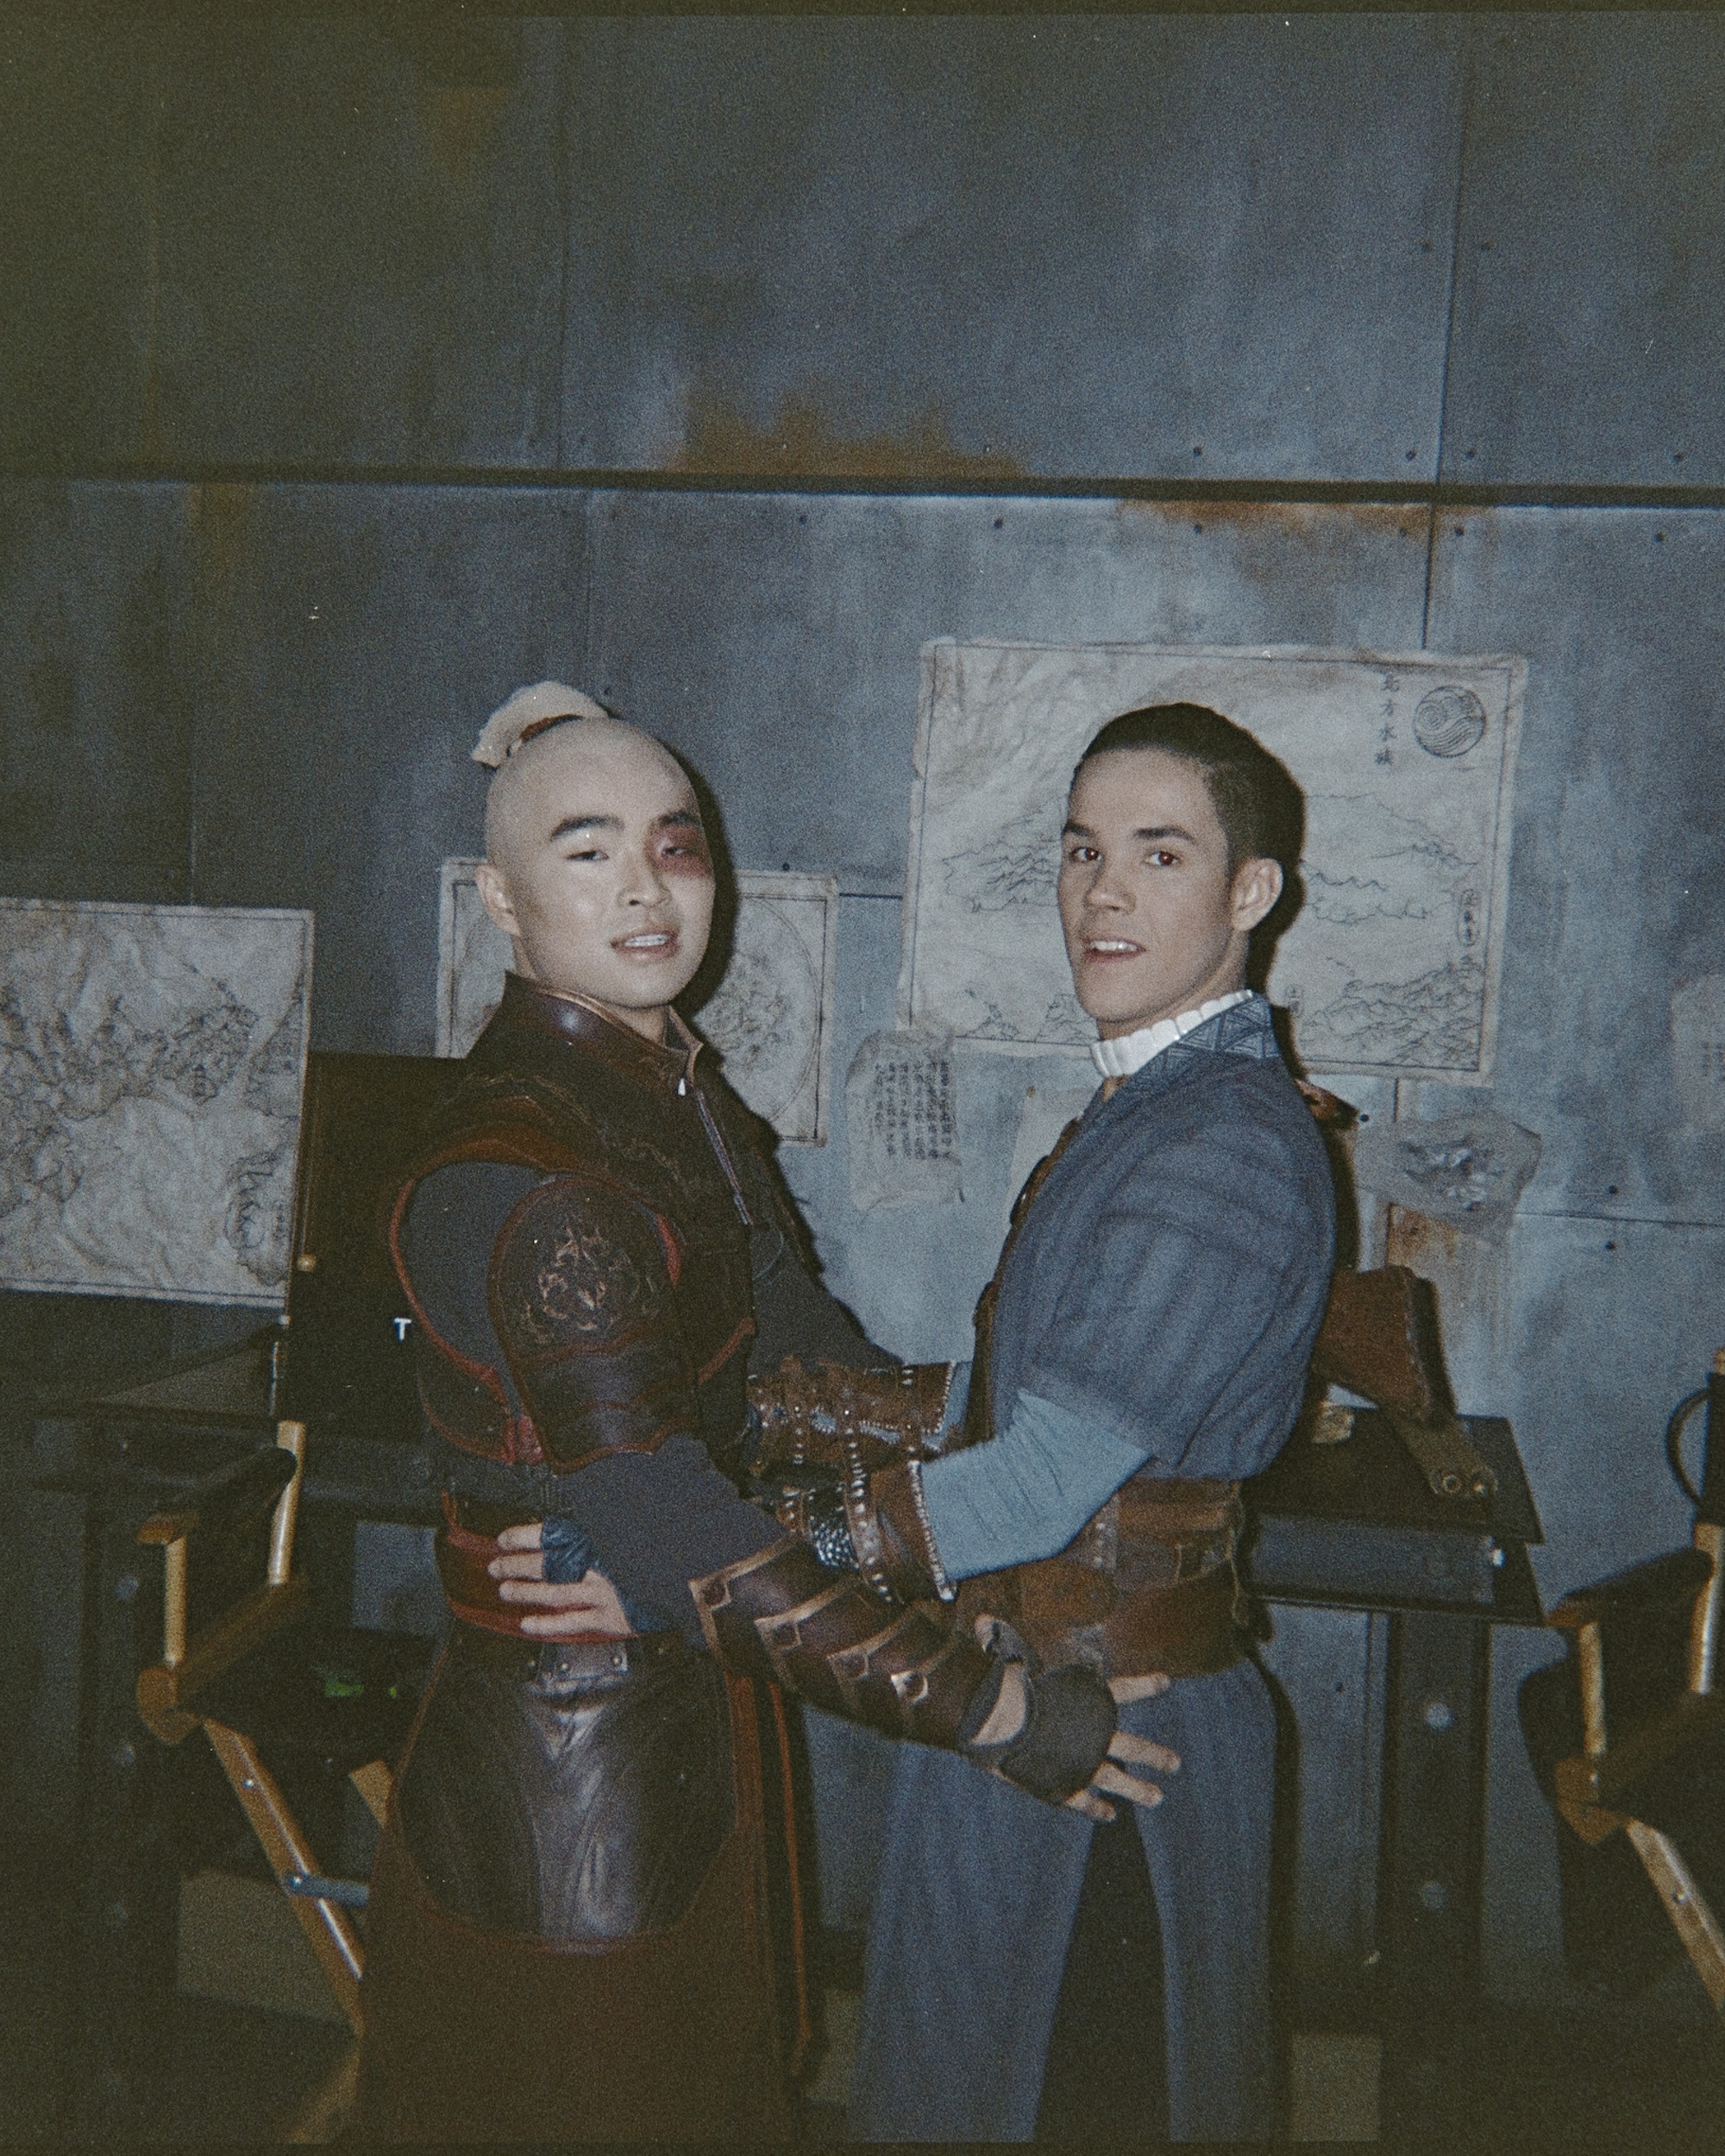 Two actors on set, one in armor and one in a suit, smiling at the camera